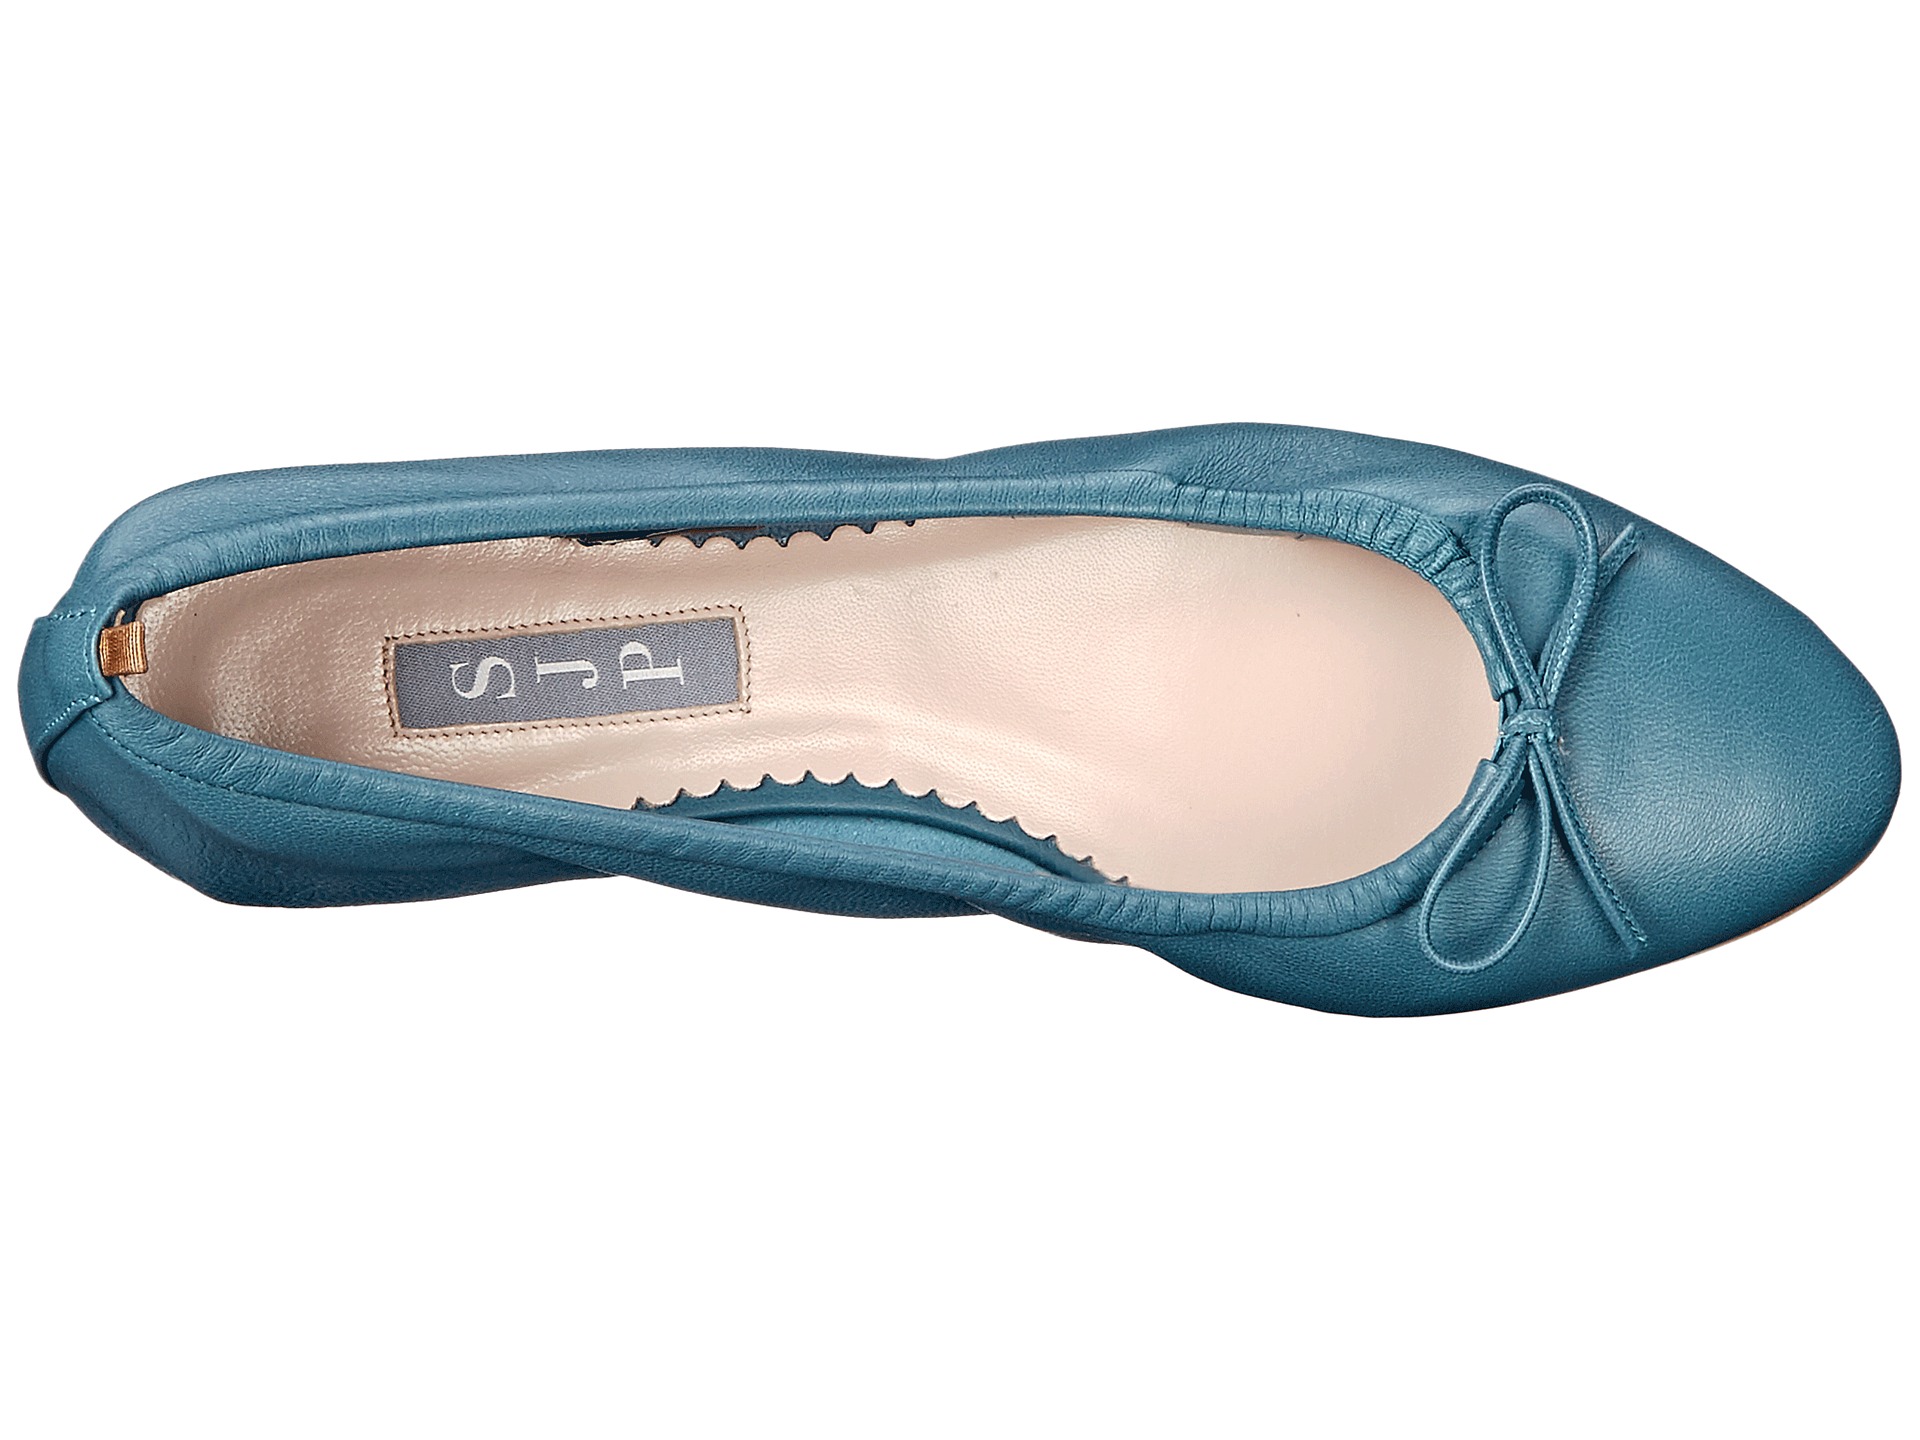 SJP by Sarah Jessica Parker Gelsey Flat Panama Blue Leather - Zappos ...